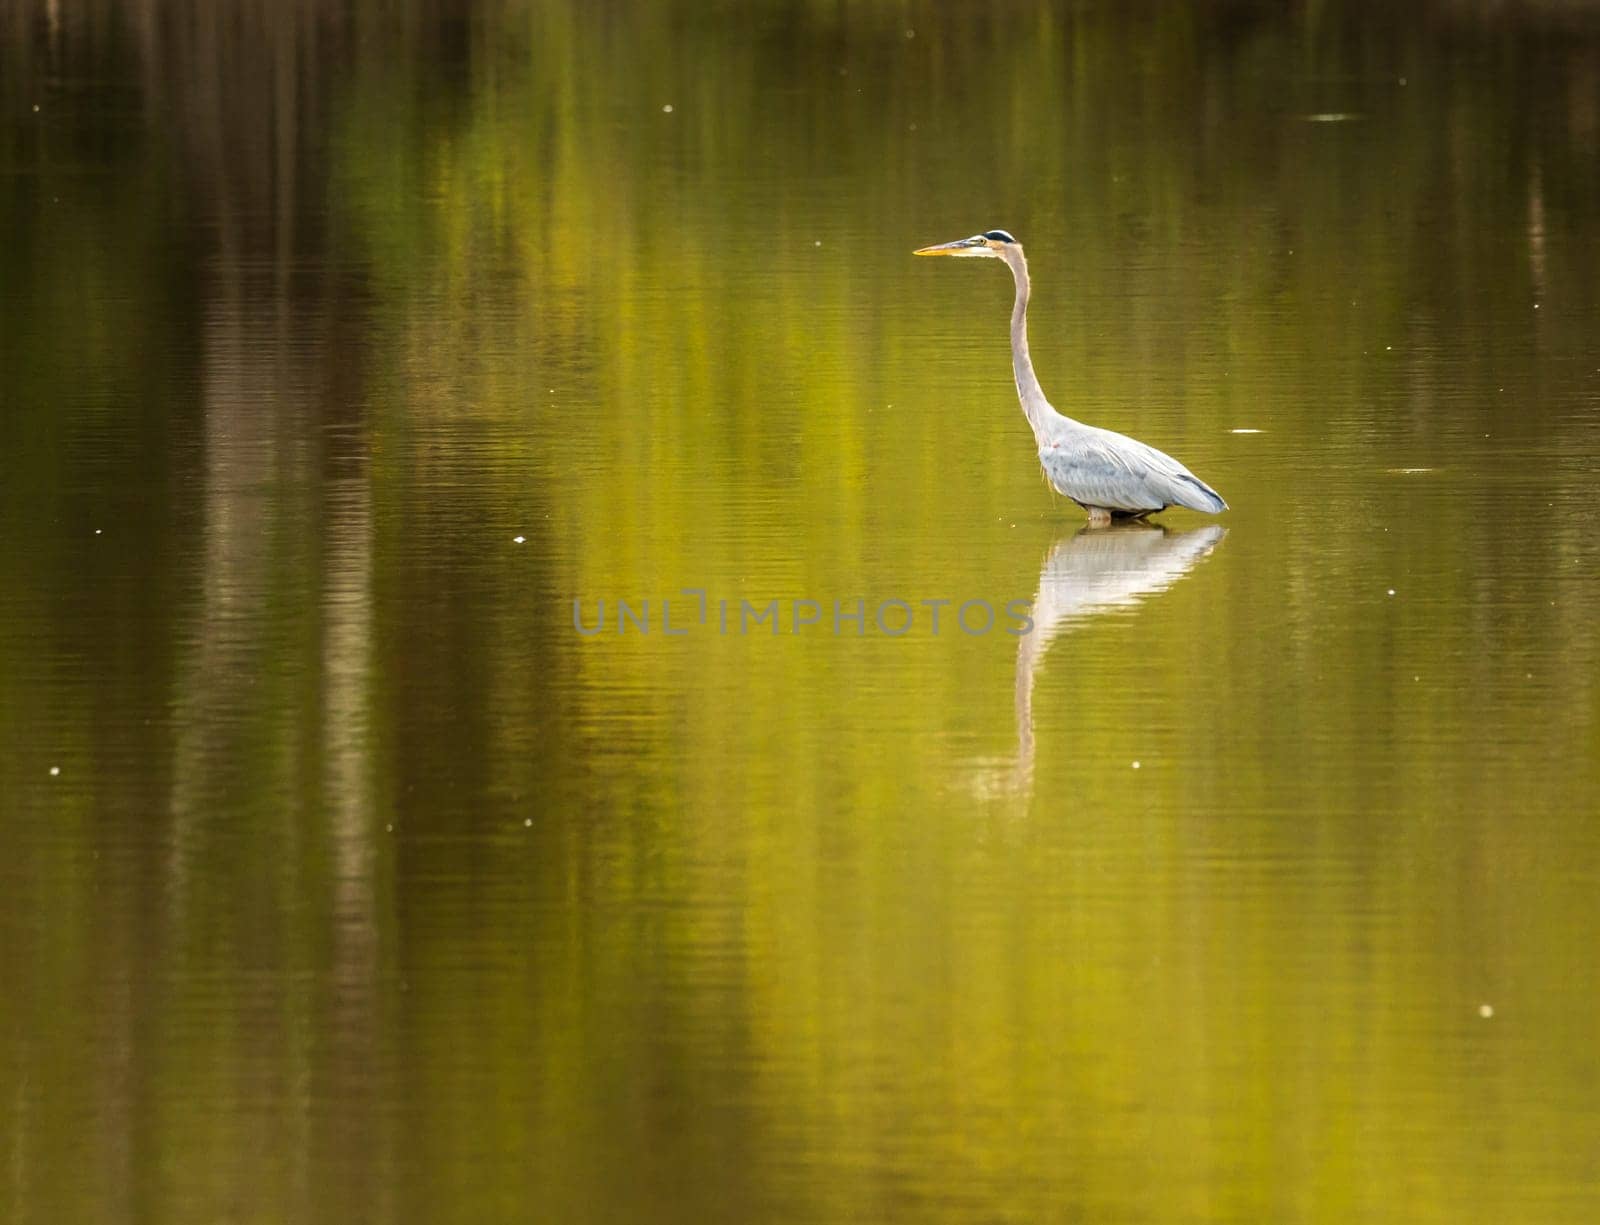 Great blue heron standing in calm water in Atchafalaya basin by steheap